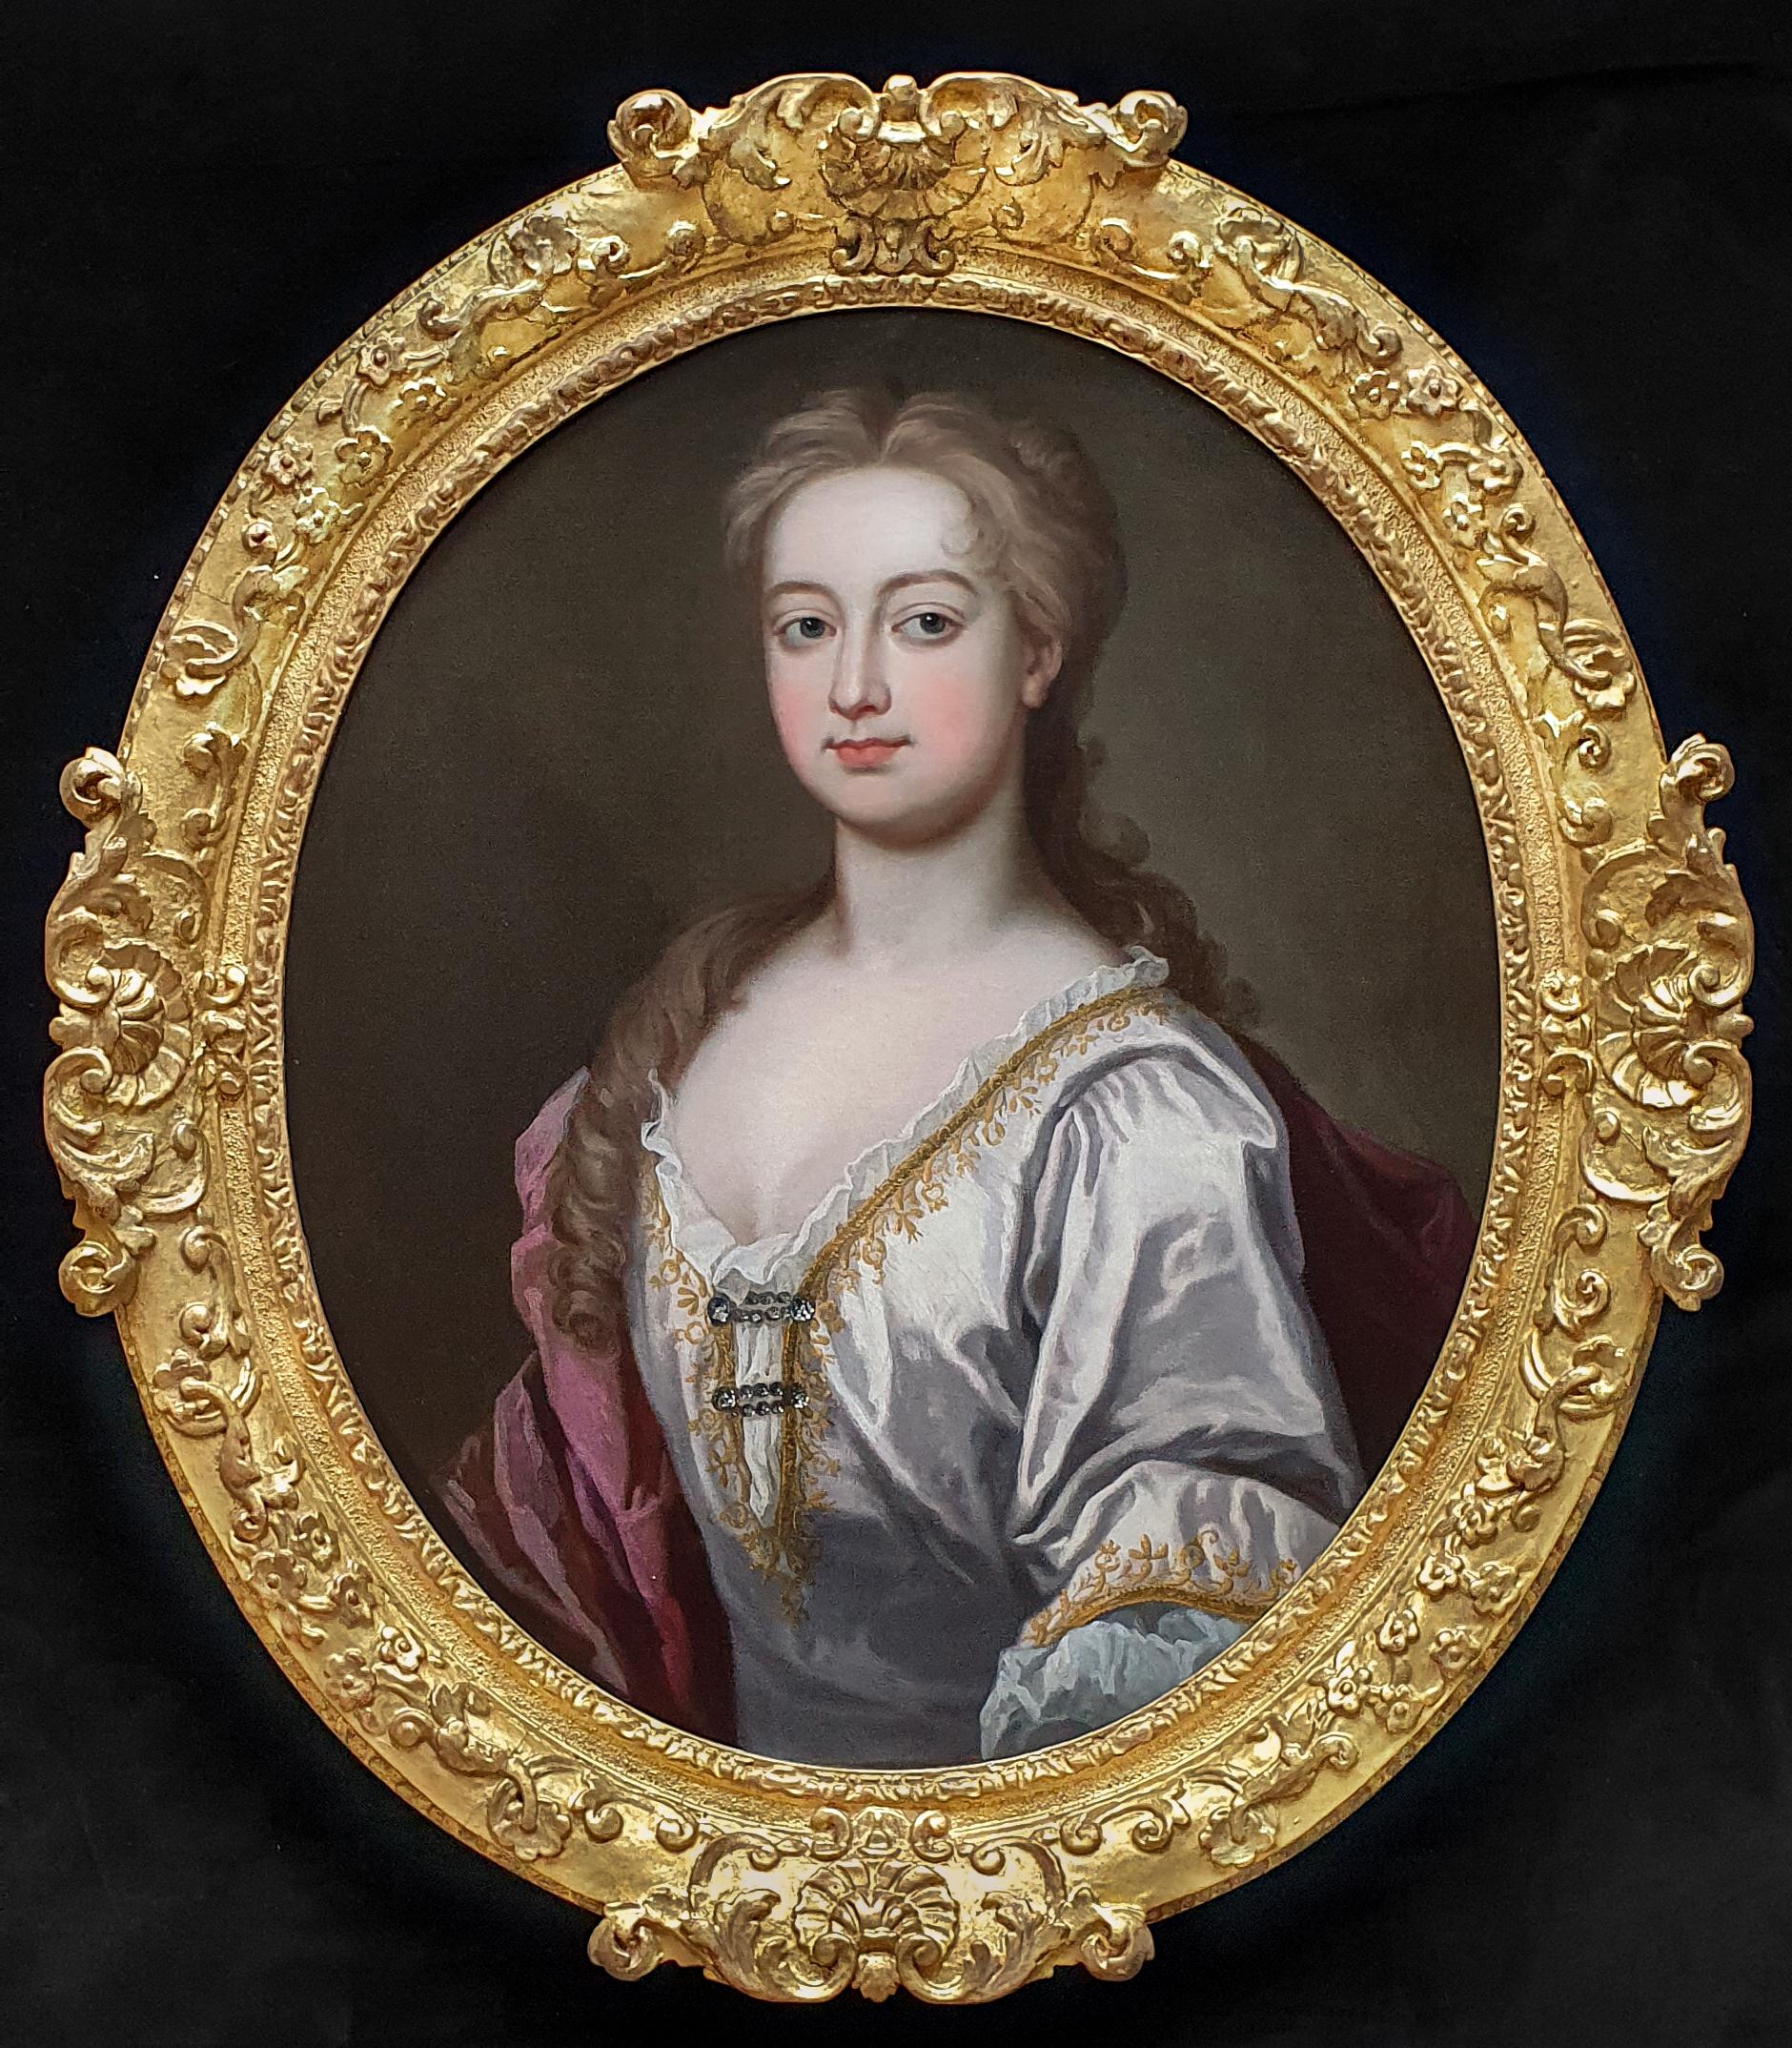 (Circle of) Godfrey Kneller Portrait Painting - PORTRAIT of a Lady in Silver Silk Dress c.1725, Superb Gilded & Carved Frame